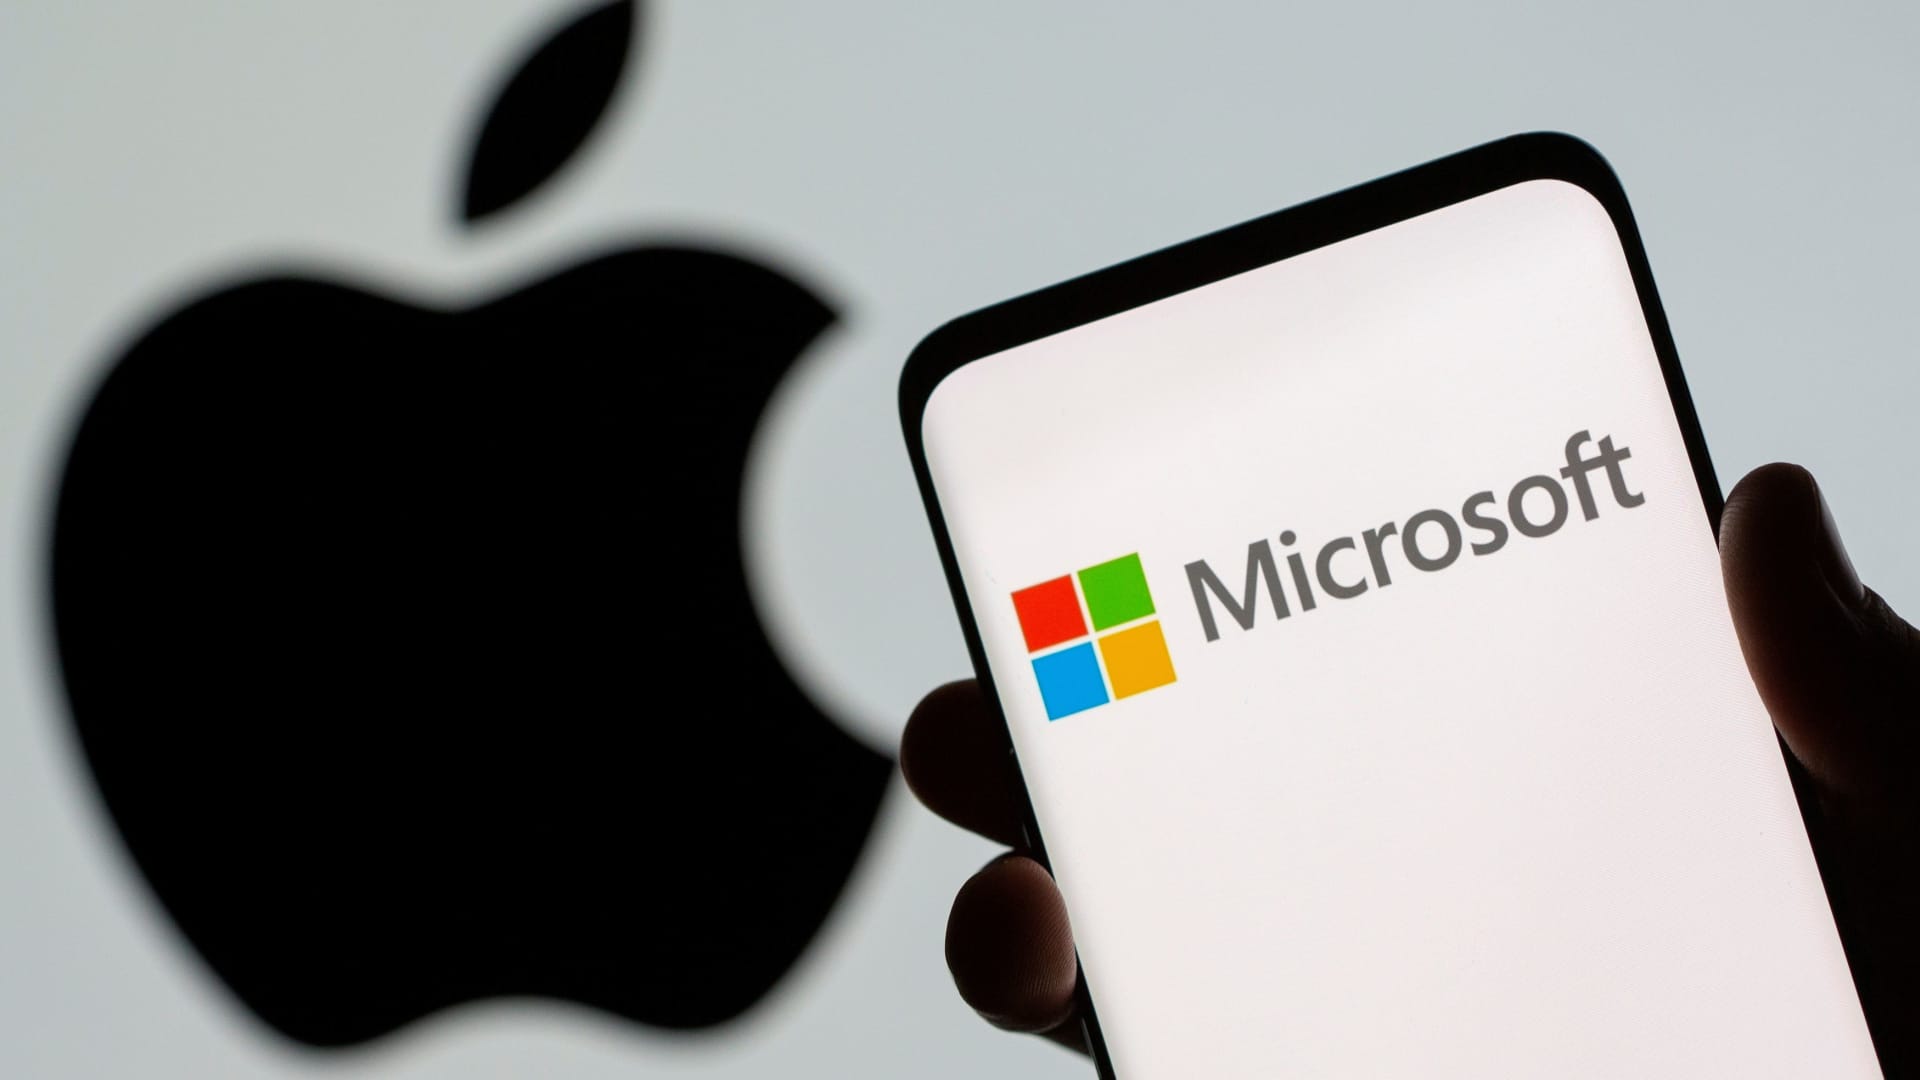 Apple vs. Microsoft? One outperforming fund manager picks his favorite  and explains why